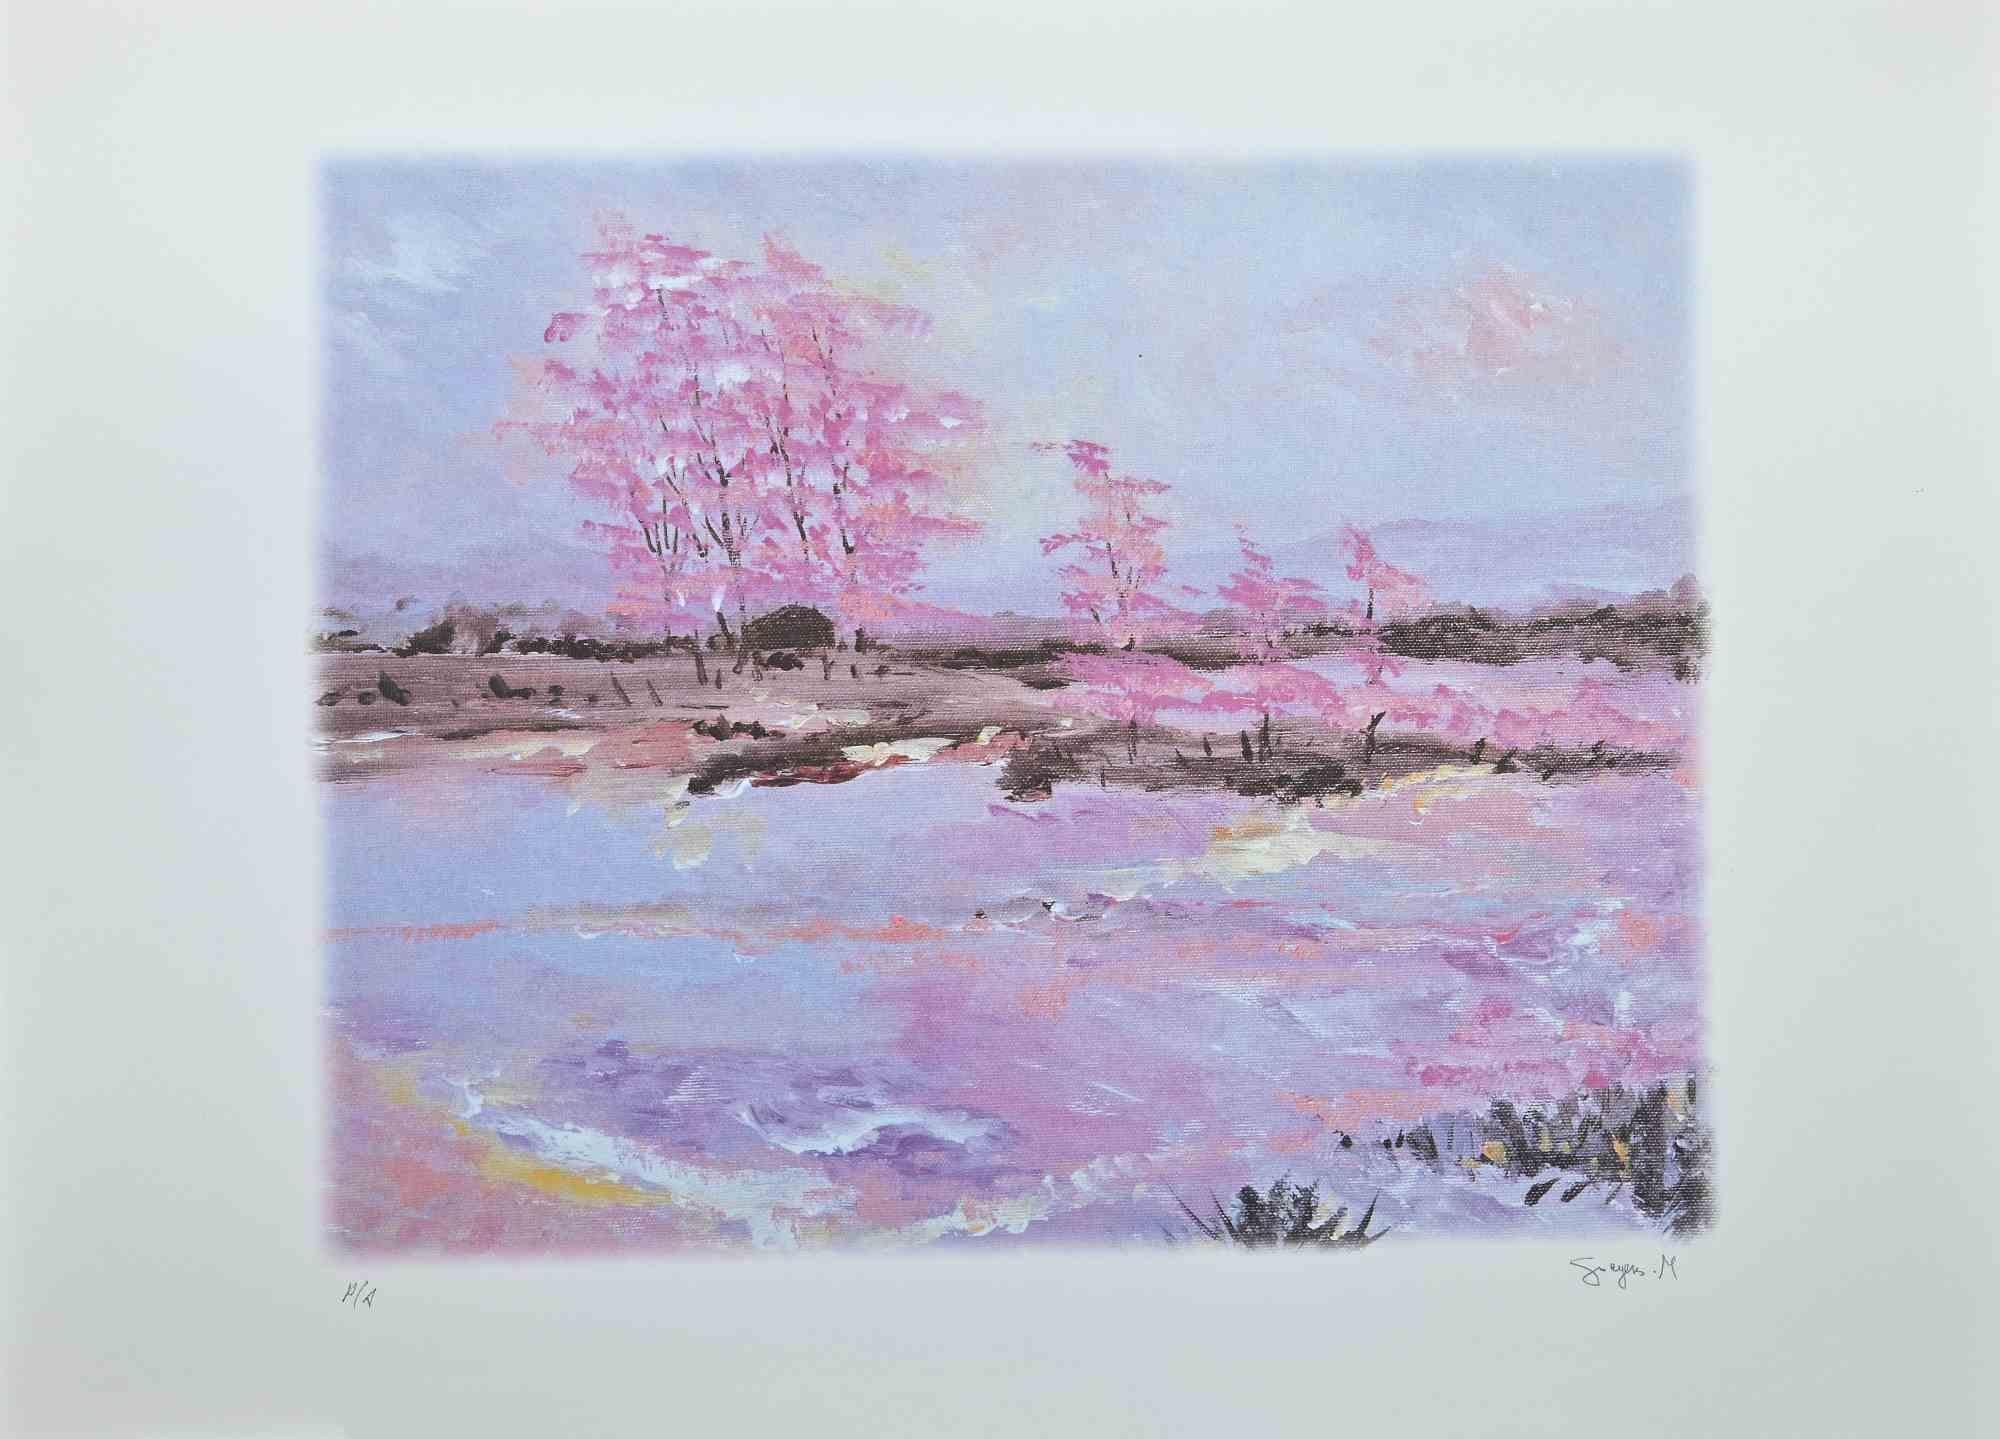 Pink blossoms is an original colored lithography artwork realized by the Belgian artist Martine Goeyens in the years 2000s.

On the back, the label of the certificate of authenticity by the "Fondazione Di Paolo".

Hand-signed on the lower right in